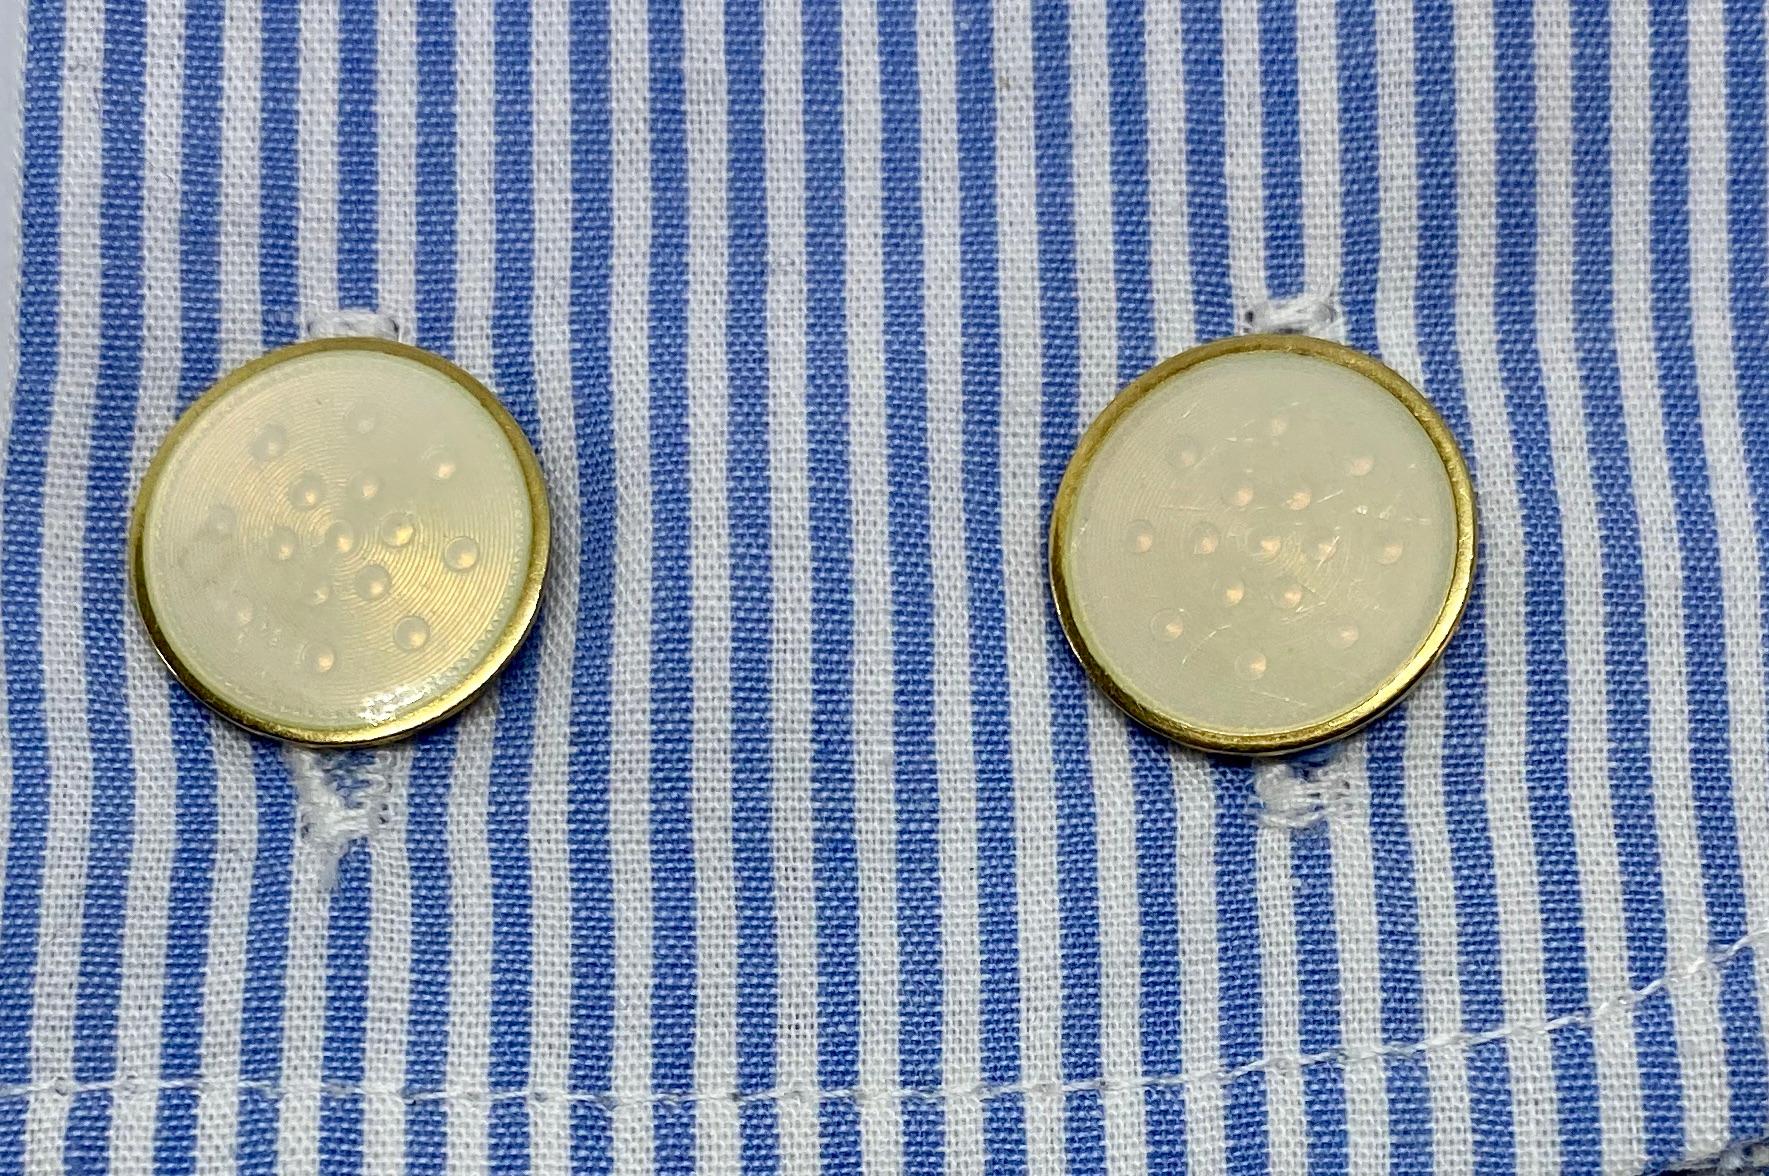 These double-sided cufflinks feature four round faces, each measuring 15.5 mm in diameter, and creme-colored enameling over engraved circles. They're set in yellow gold and joined by solid, high-quality links stamped 14K.

The creme enamel is